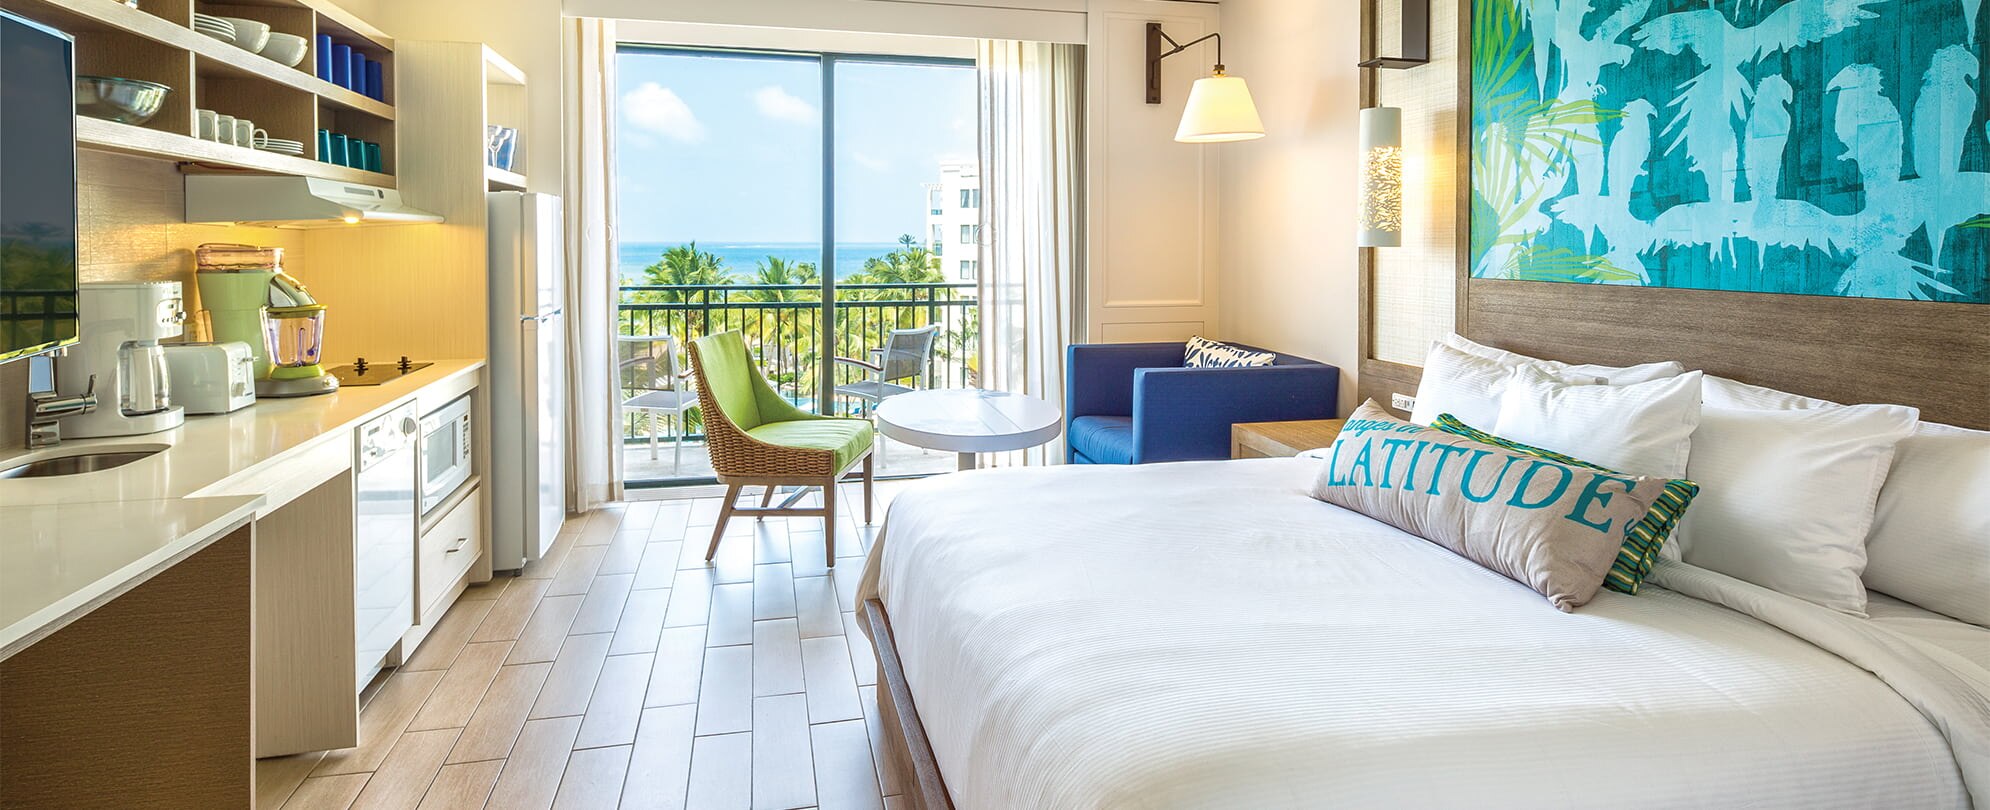 Kitchenette, couch, and bed in a studio suite with an ocean view at Margaritaville Vacation Club by Wyndham - Rio Mar.